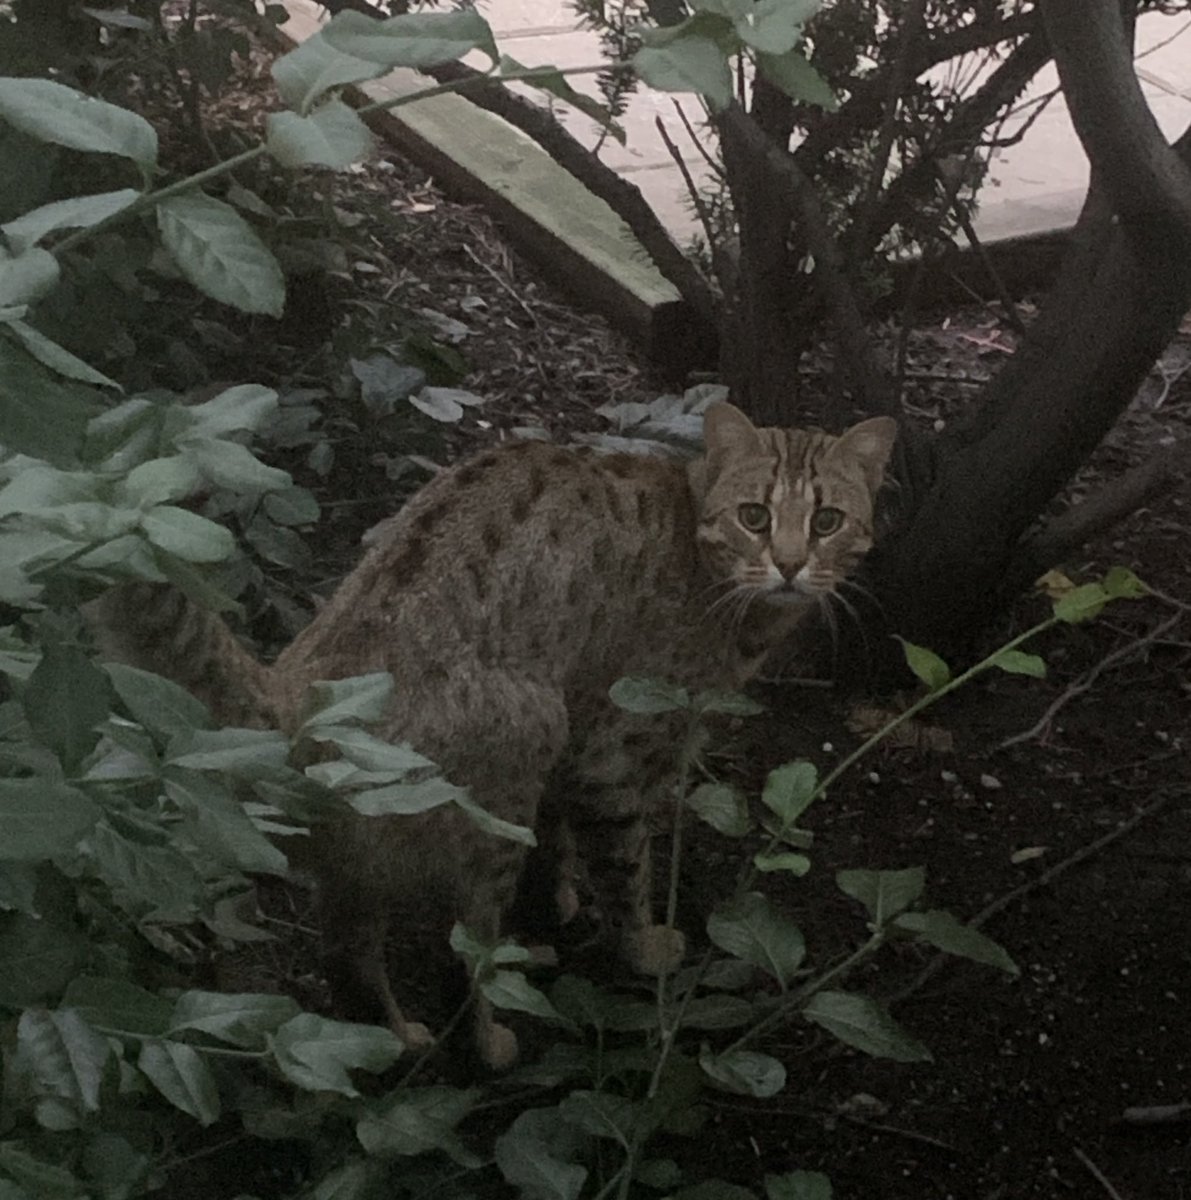 If you live in CityPlace in downtown #Toronto and this is your free-range cat, please know that he visits me pretty regularly and I’m about 2 seconds away from adopting him.

He was in my living room tonight. I think he’s on board with the plan.

#CatBurglar